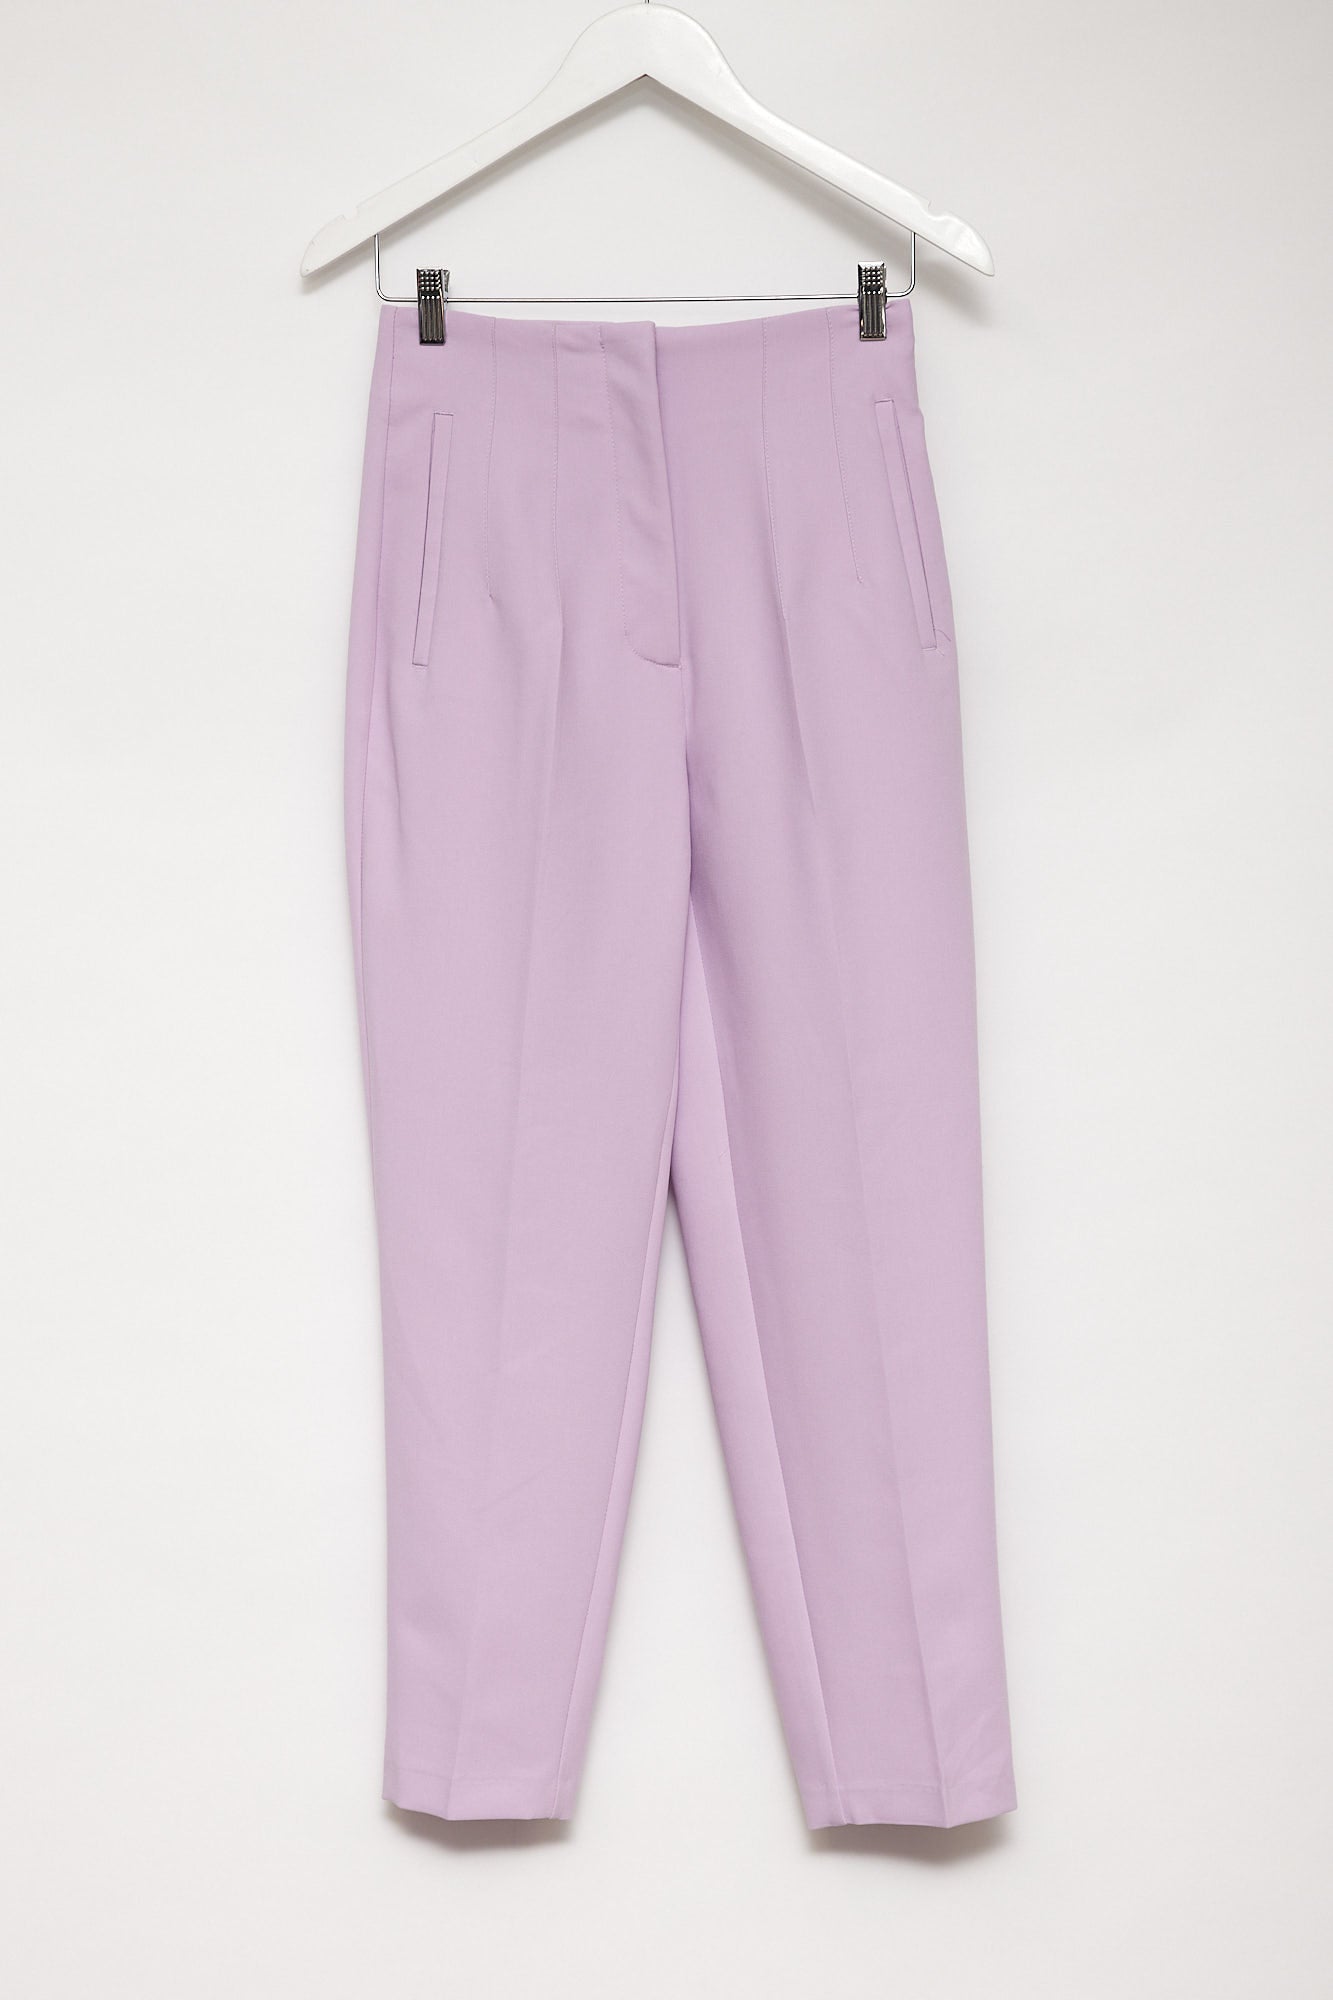 Womens Zara Lilac high waisted trouser size small – thestylingbank